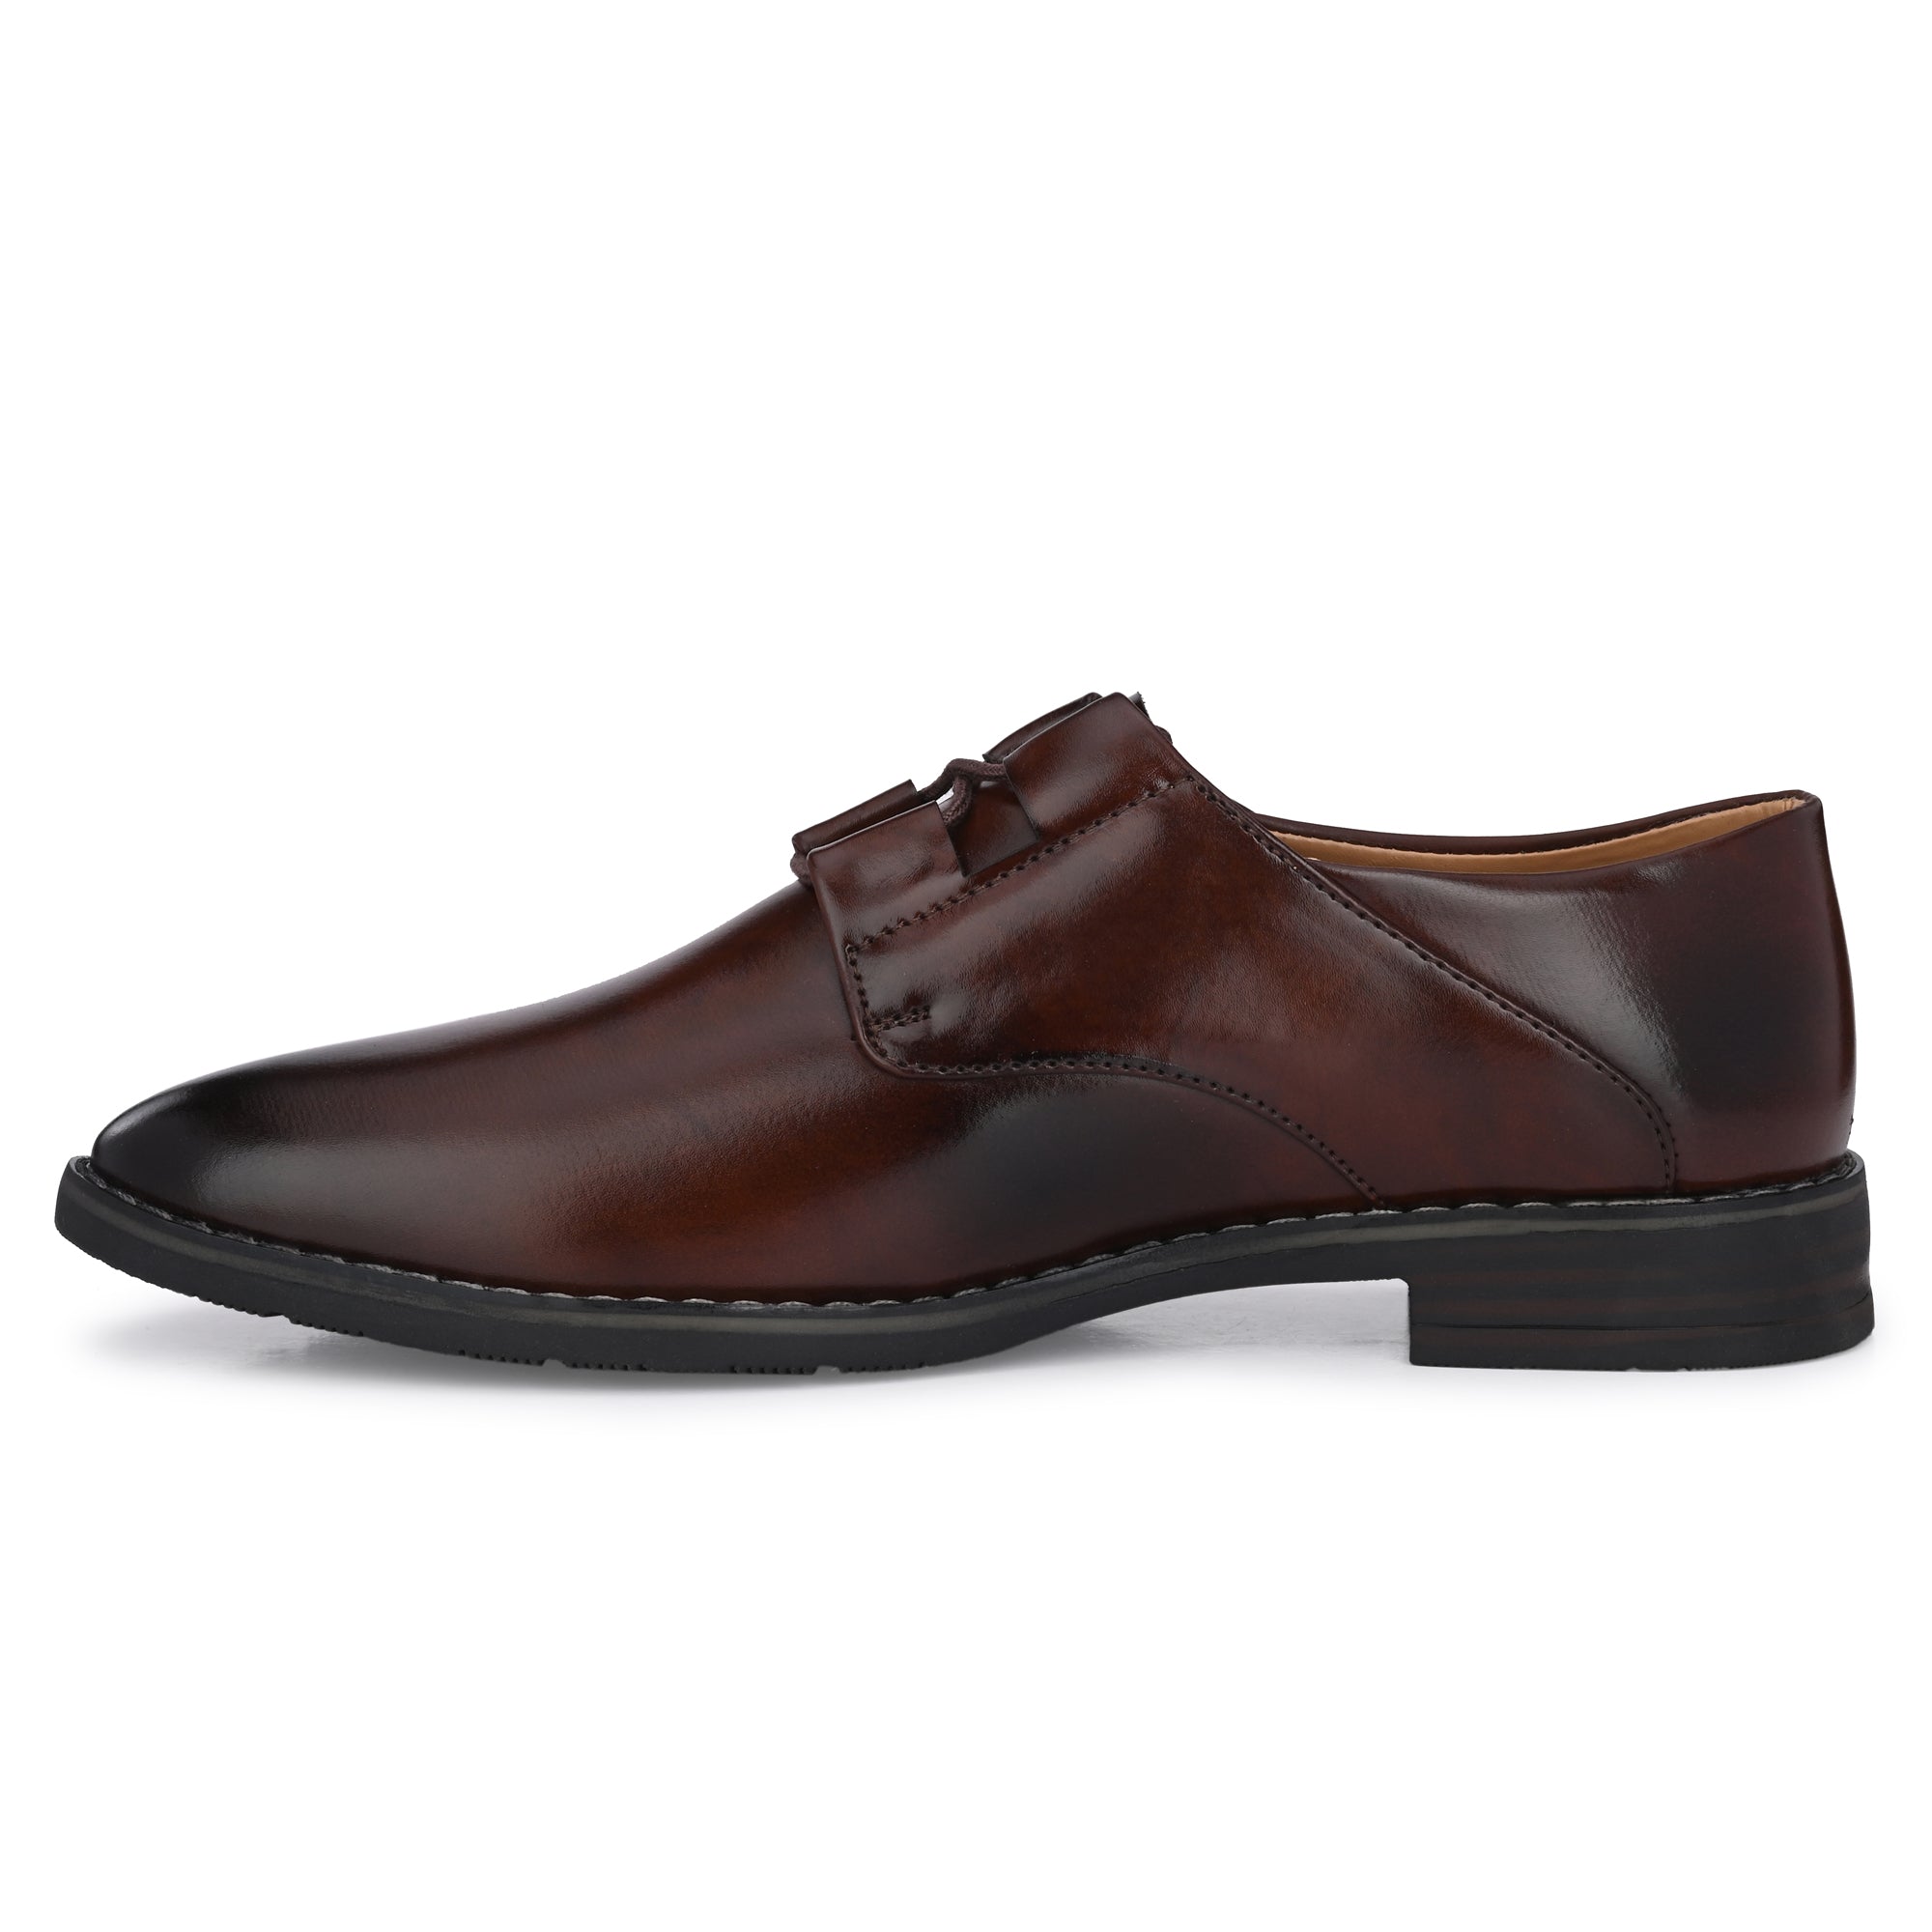 formal-lace-up-attitudist-shoes-for-men-with-design-4001brown